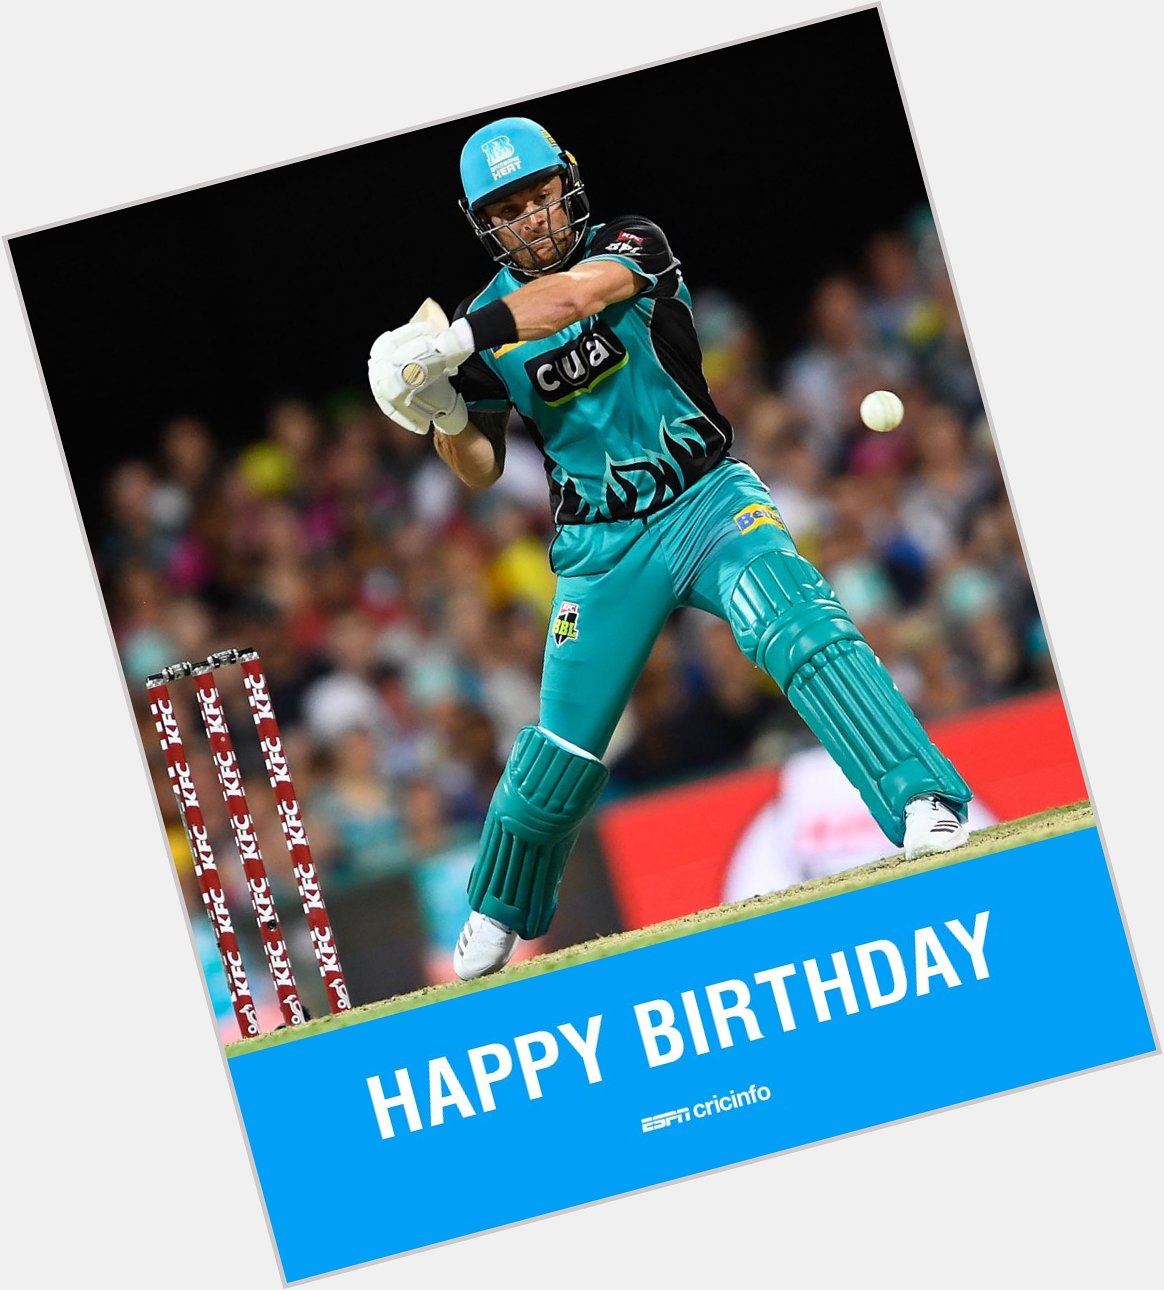  Happy birthday to Brendon McCullum! What\s your favourite Baz moment? 

 